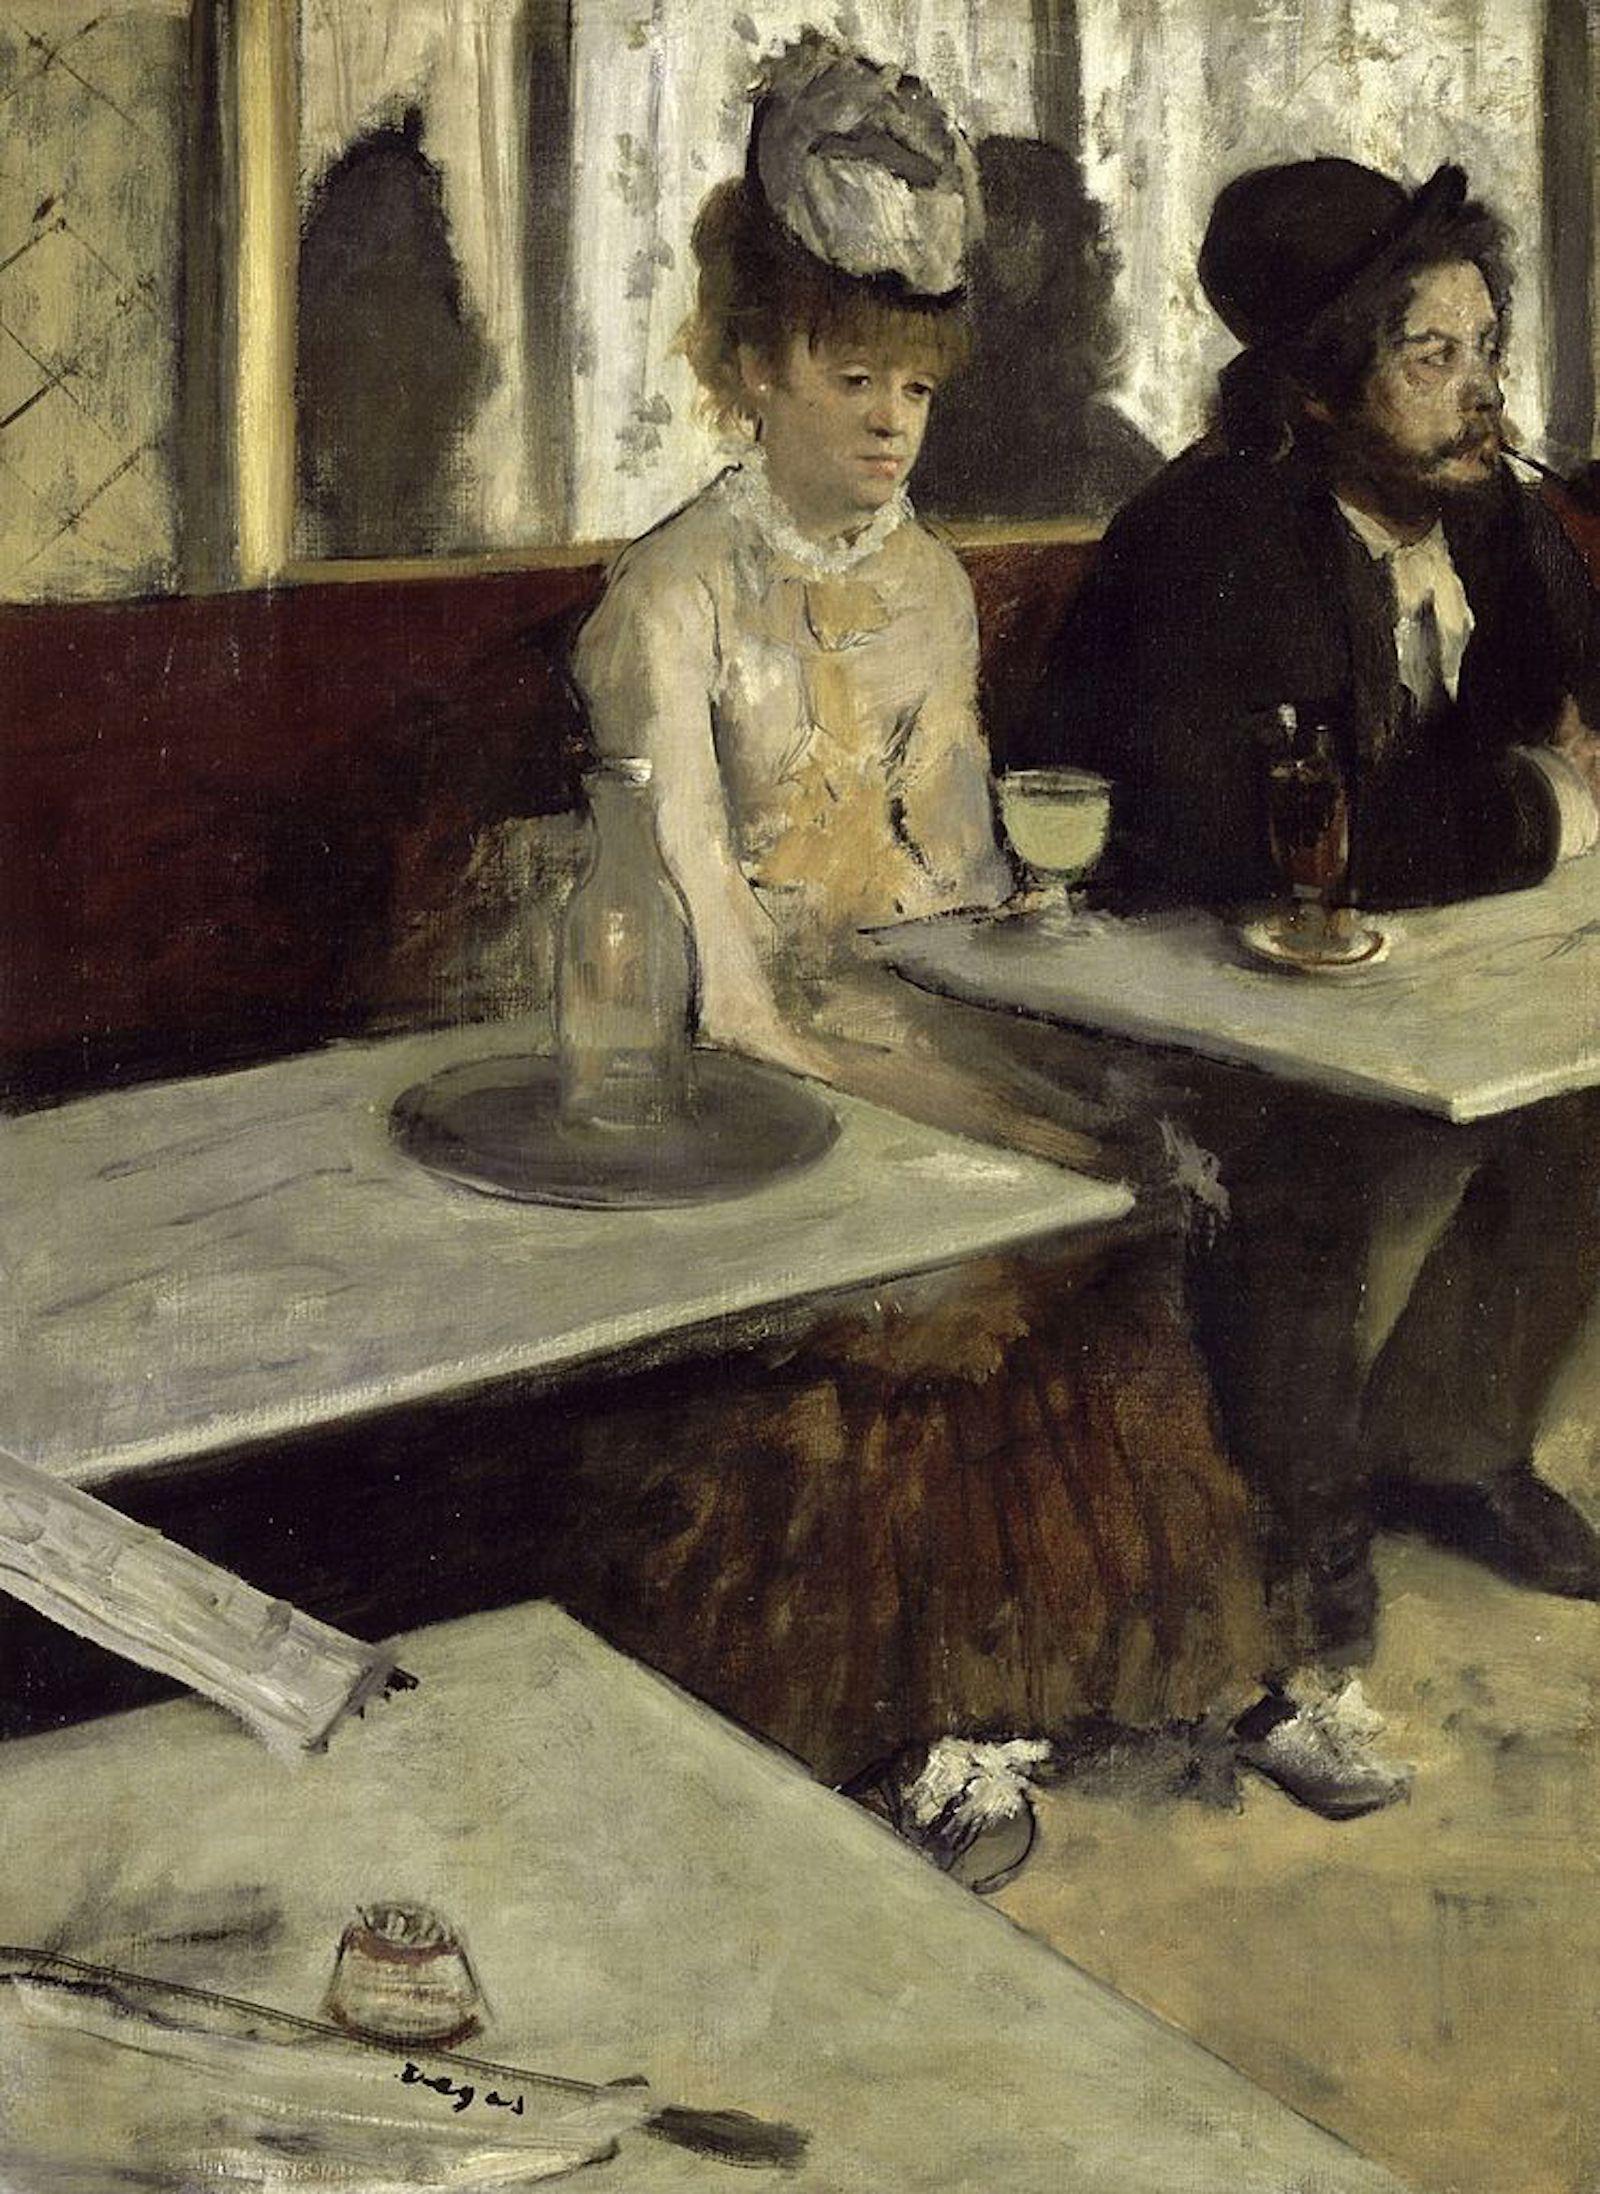 Edgar Degas, L’Absinthe, Oil on Canvas, 1873, Musée d'Orsay Source- Wikimedia Commons 